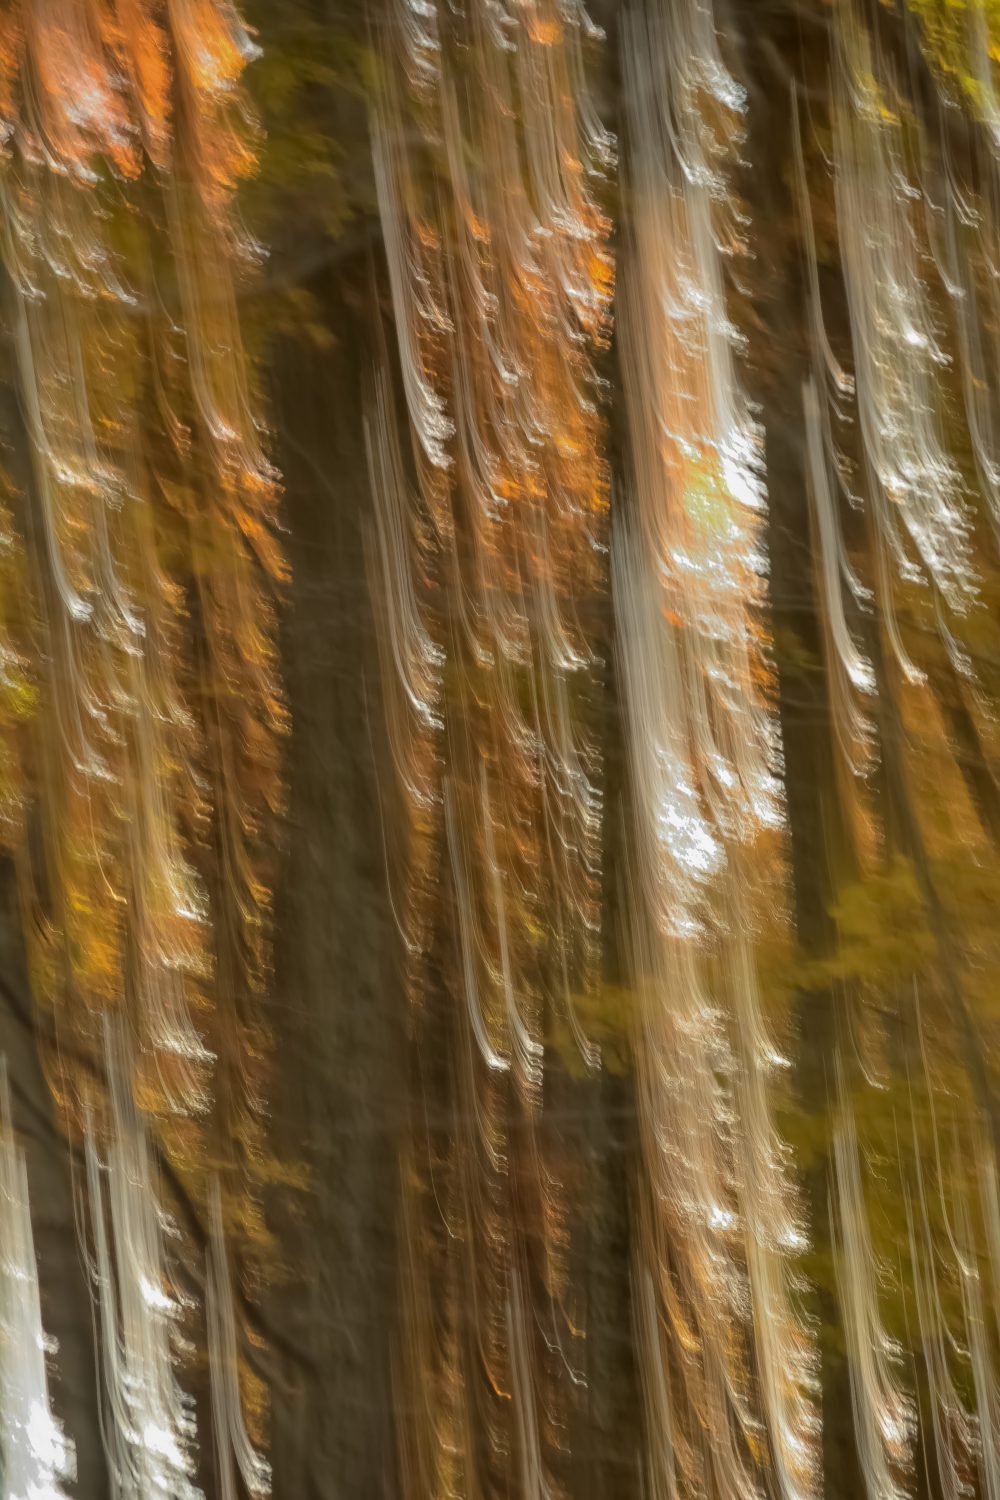 Vertical blur with fall foliage and light slanting through the tree trunks, 1/2 second @ f/5.6. © Sastry Karra